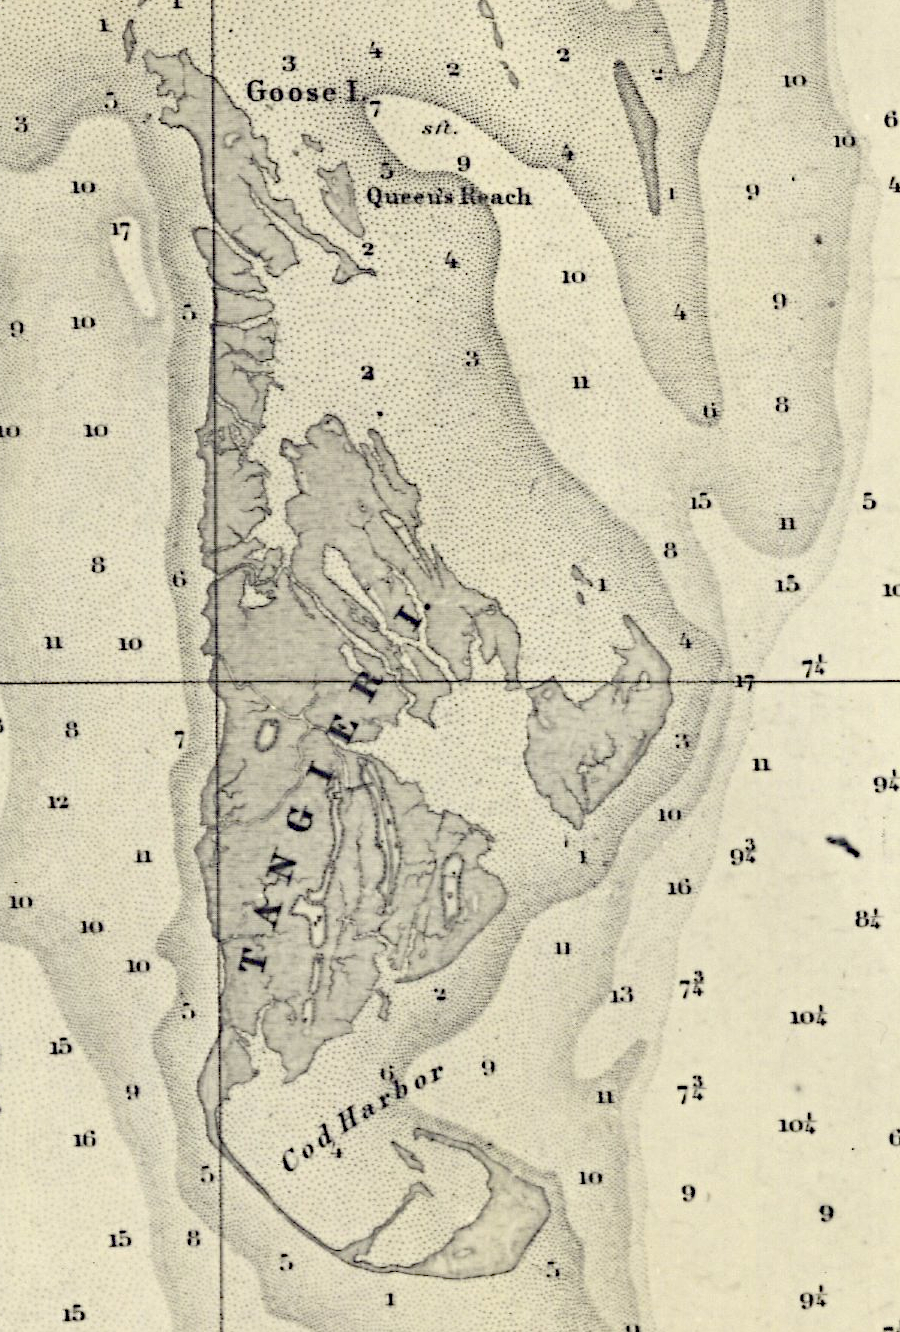 Tangier Island was much larger in 1863